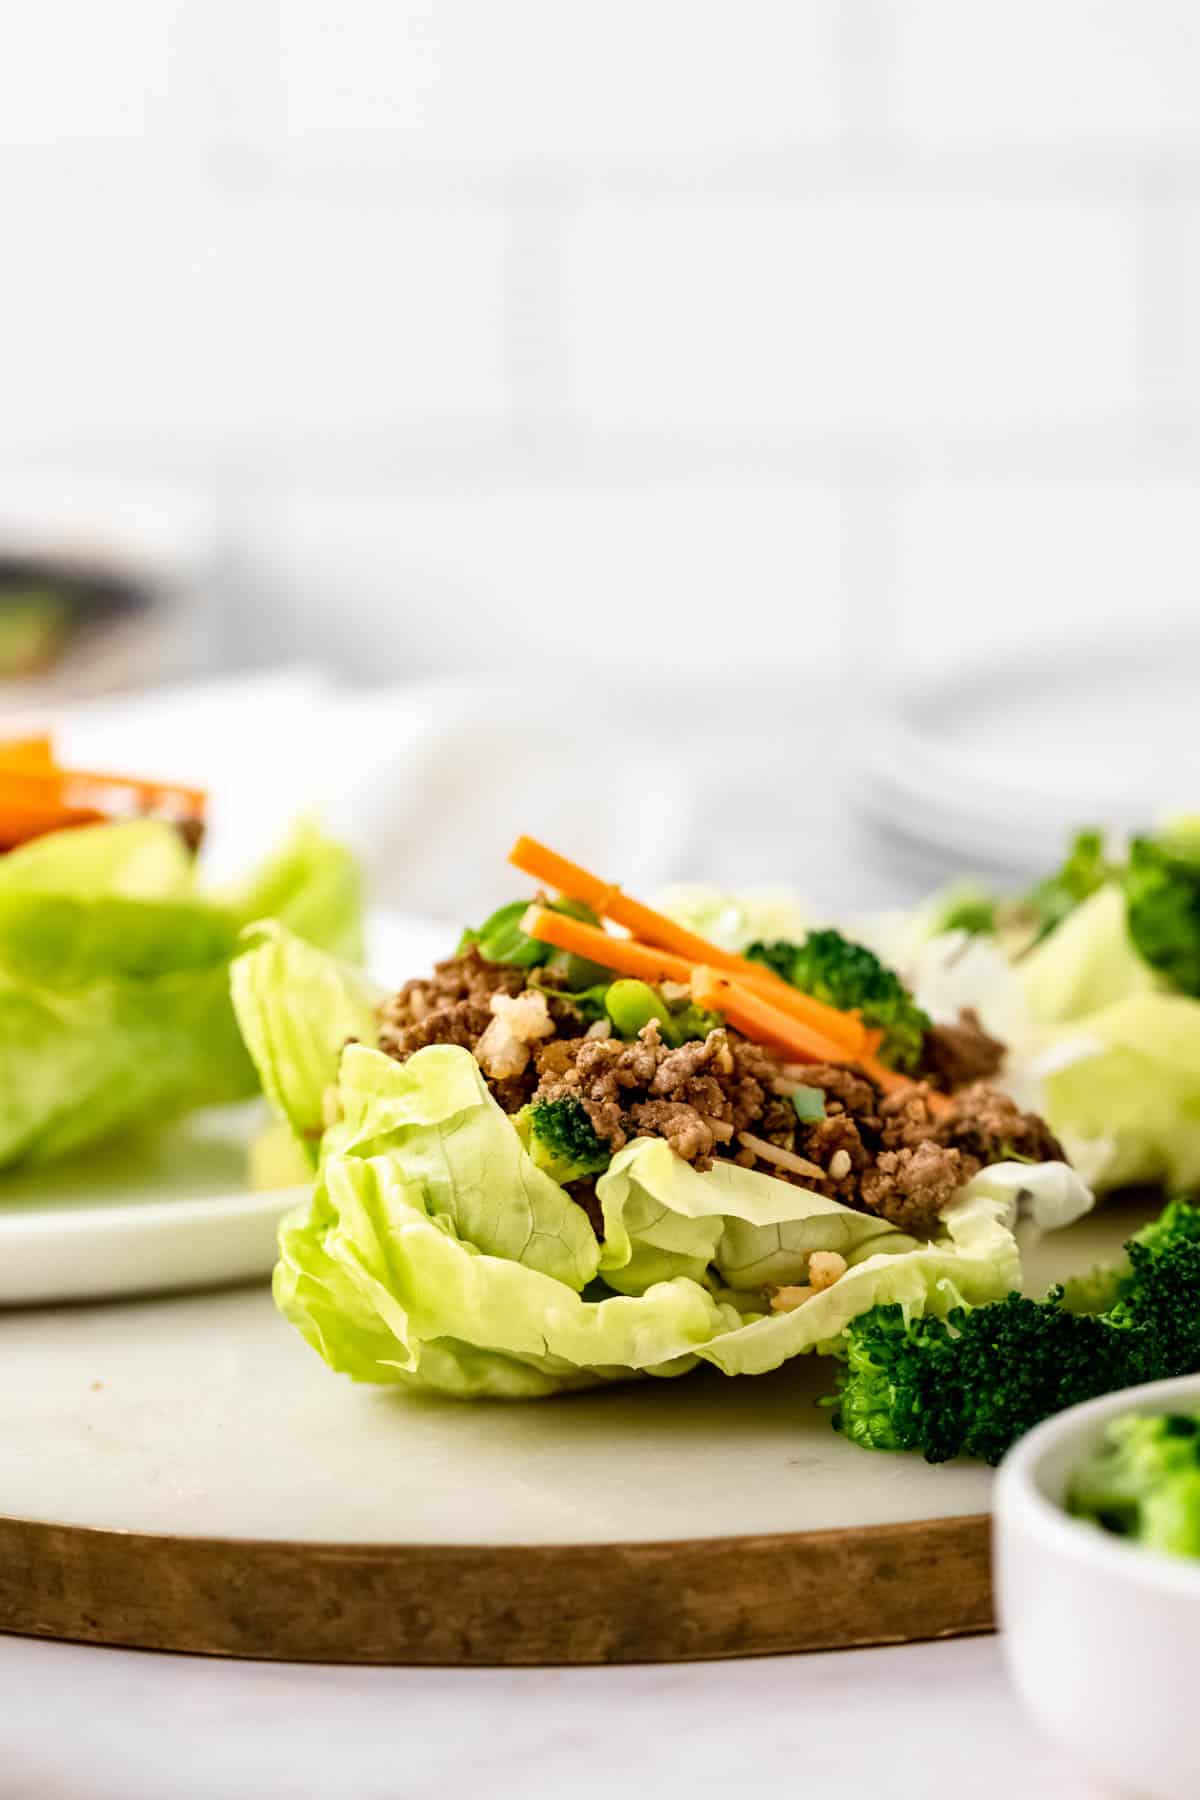 An Asian beef and broccoli lettuce wrap on a countertop.